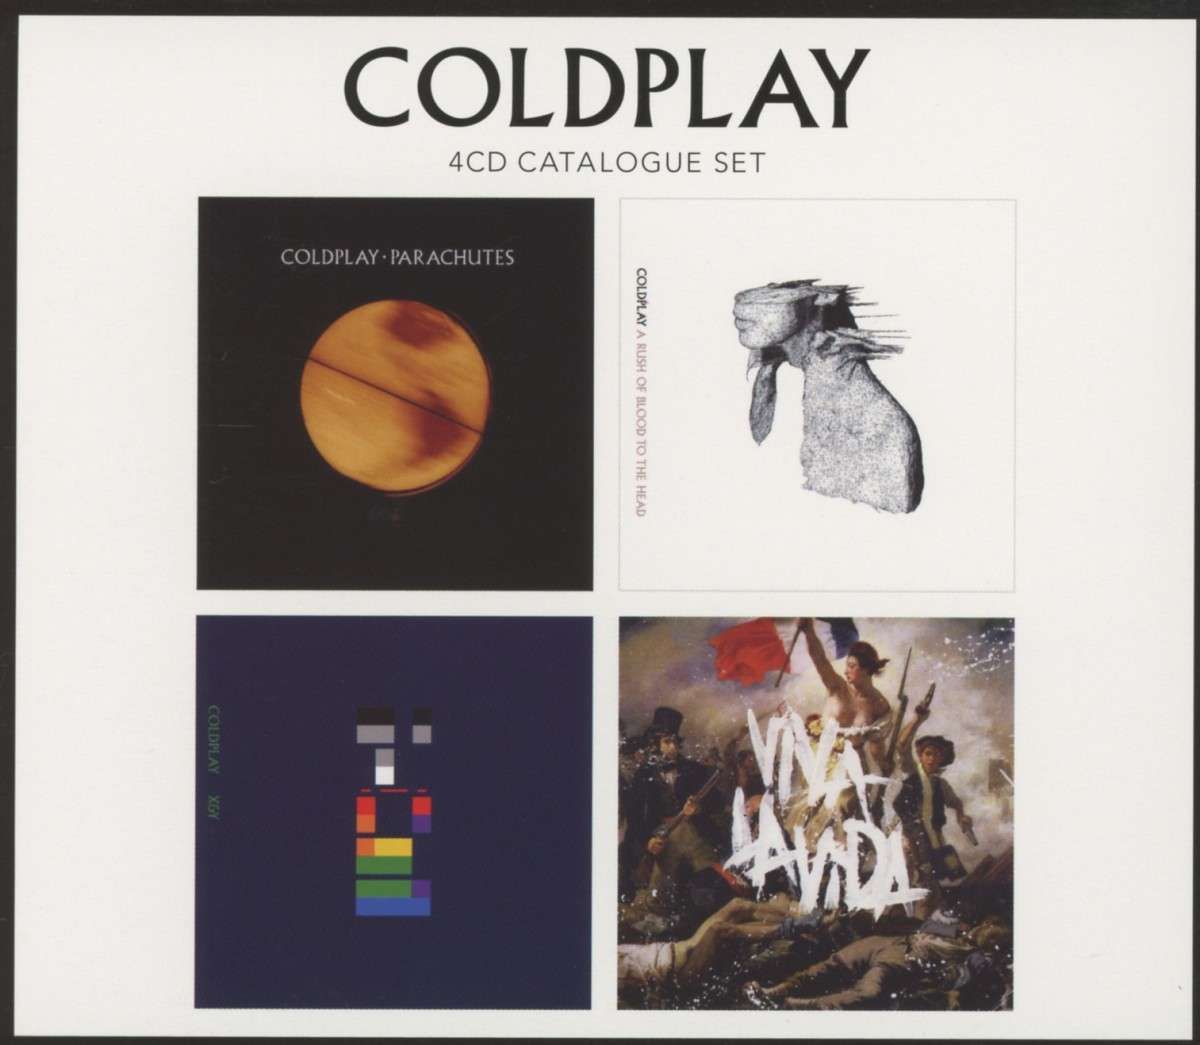 Coldplay CD. Coldplay диск. Coldplay обложки альбомов. Coldplay "Parachutes (CD)".